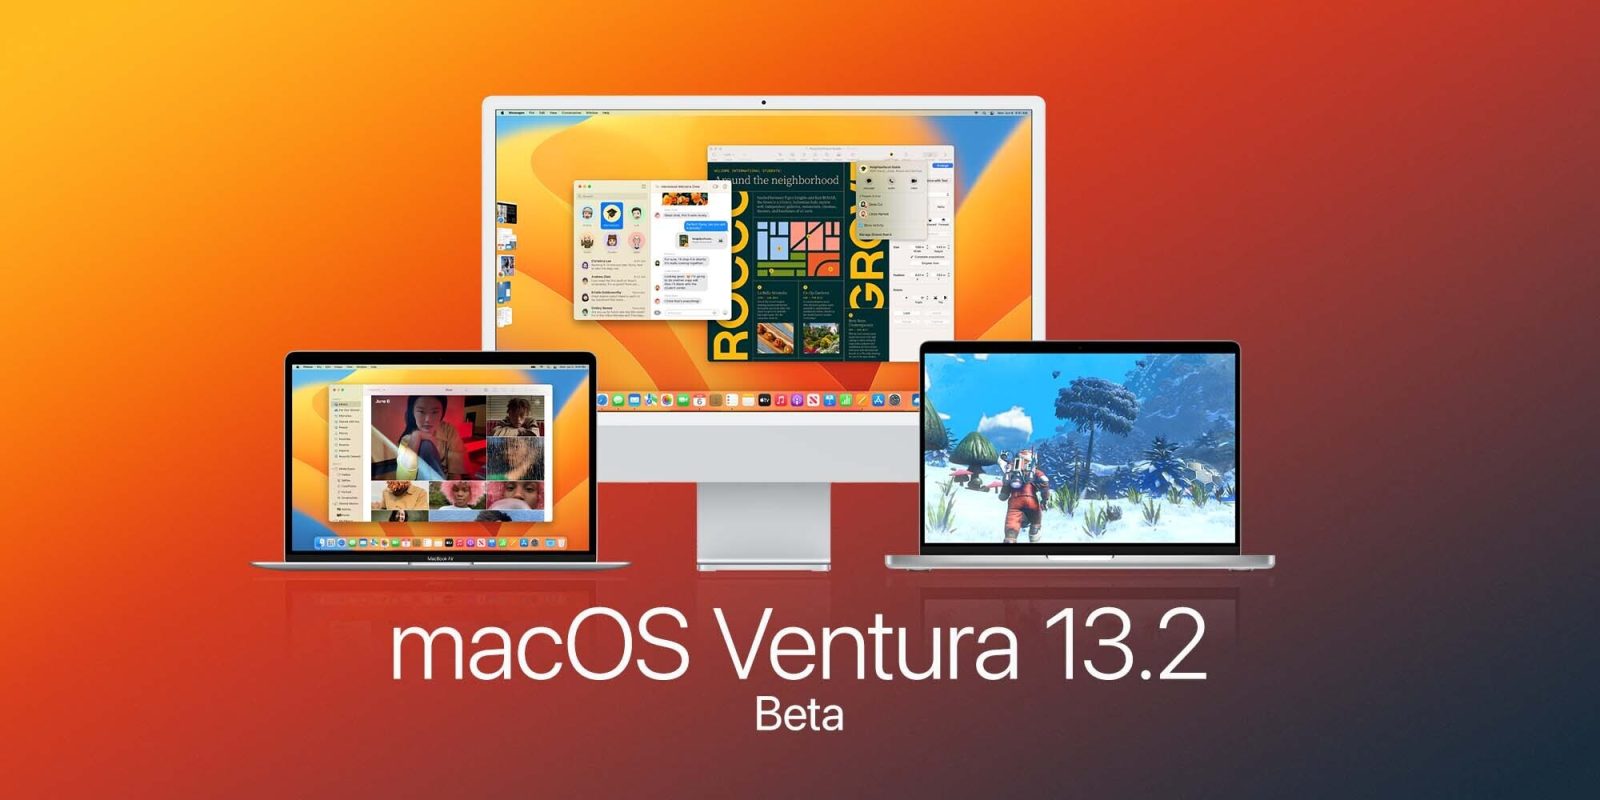 Apple rolling out first macOS Ventura 13.2 beta to developers